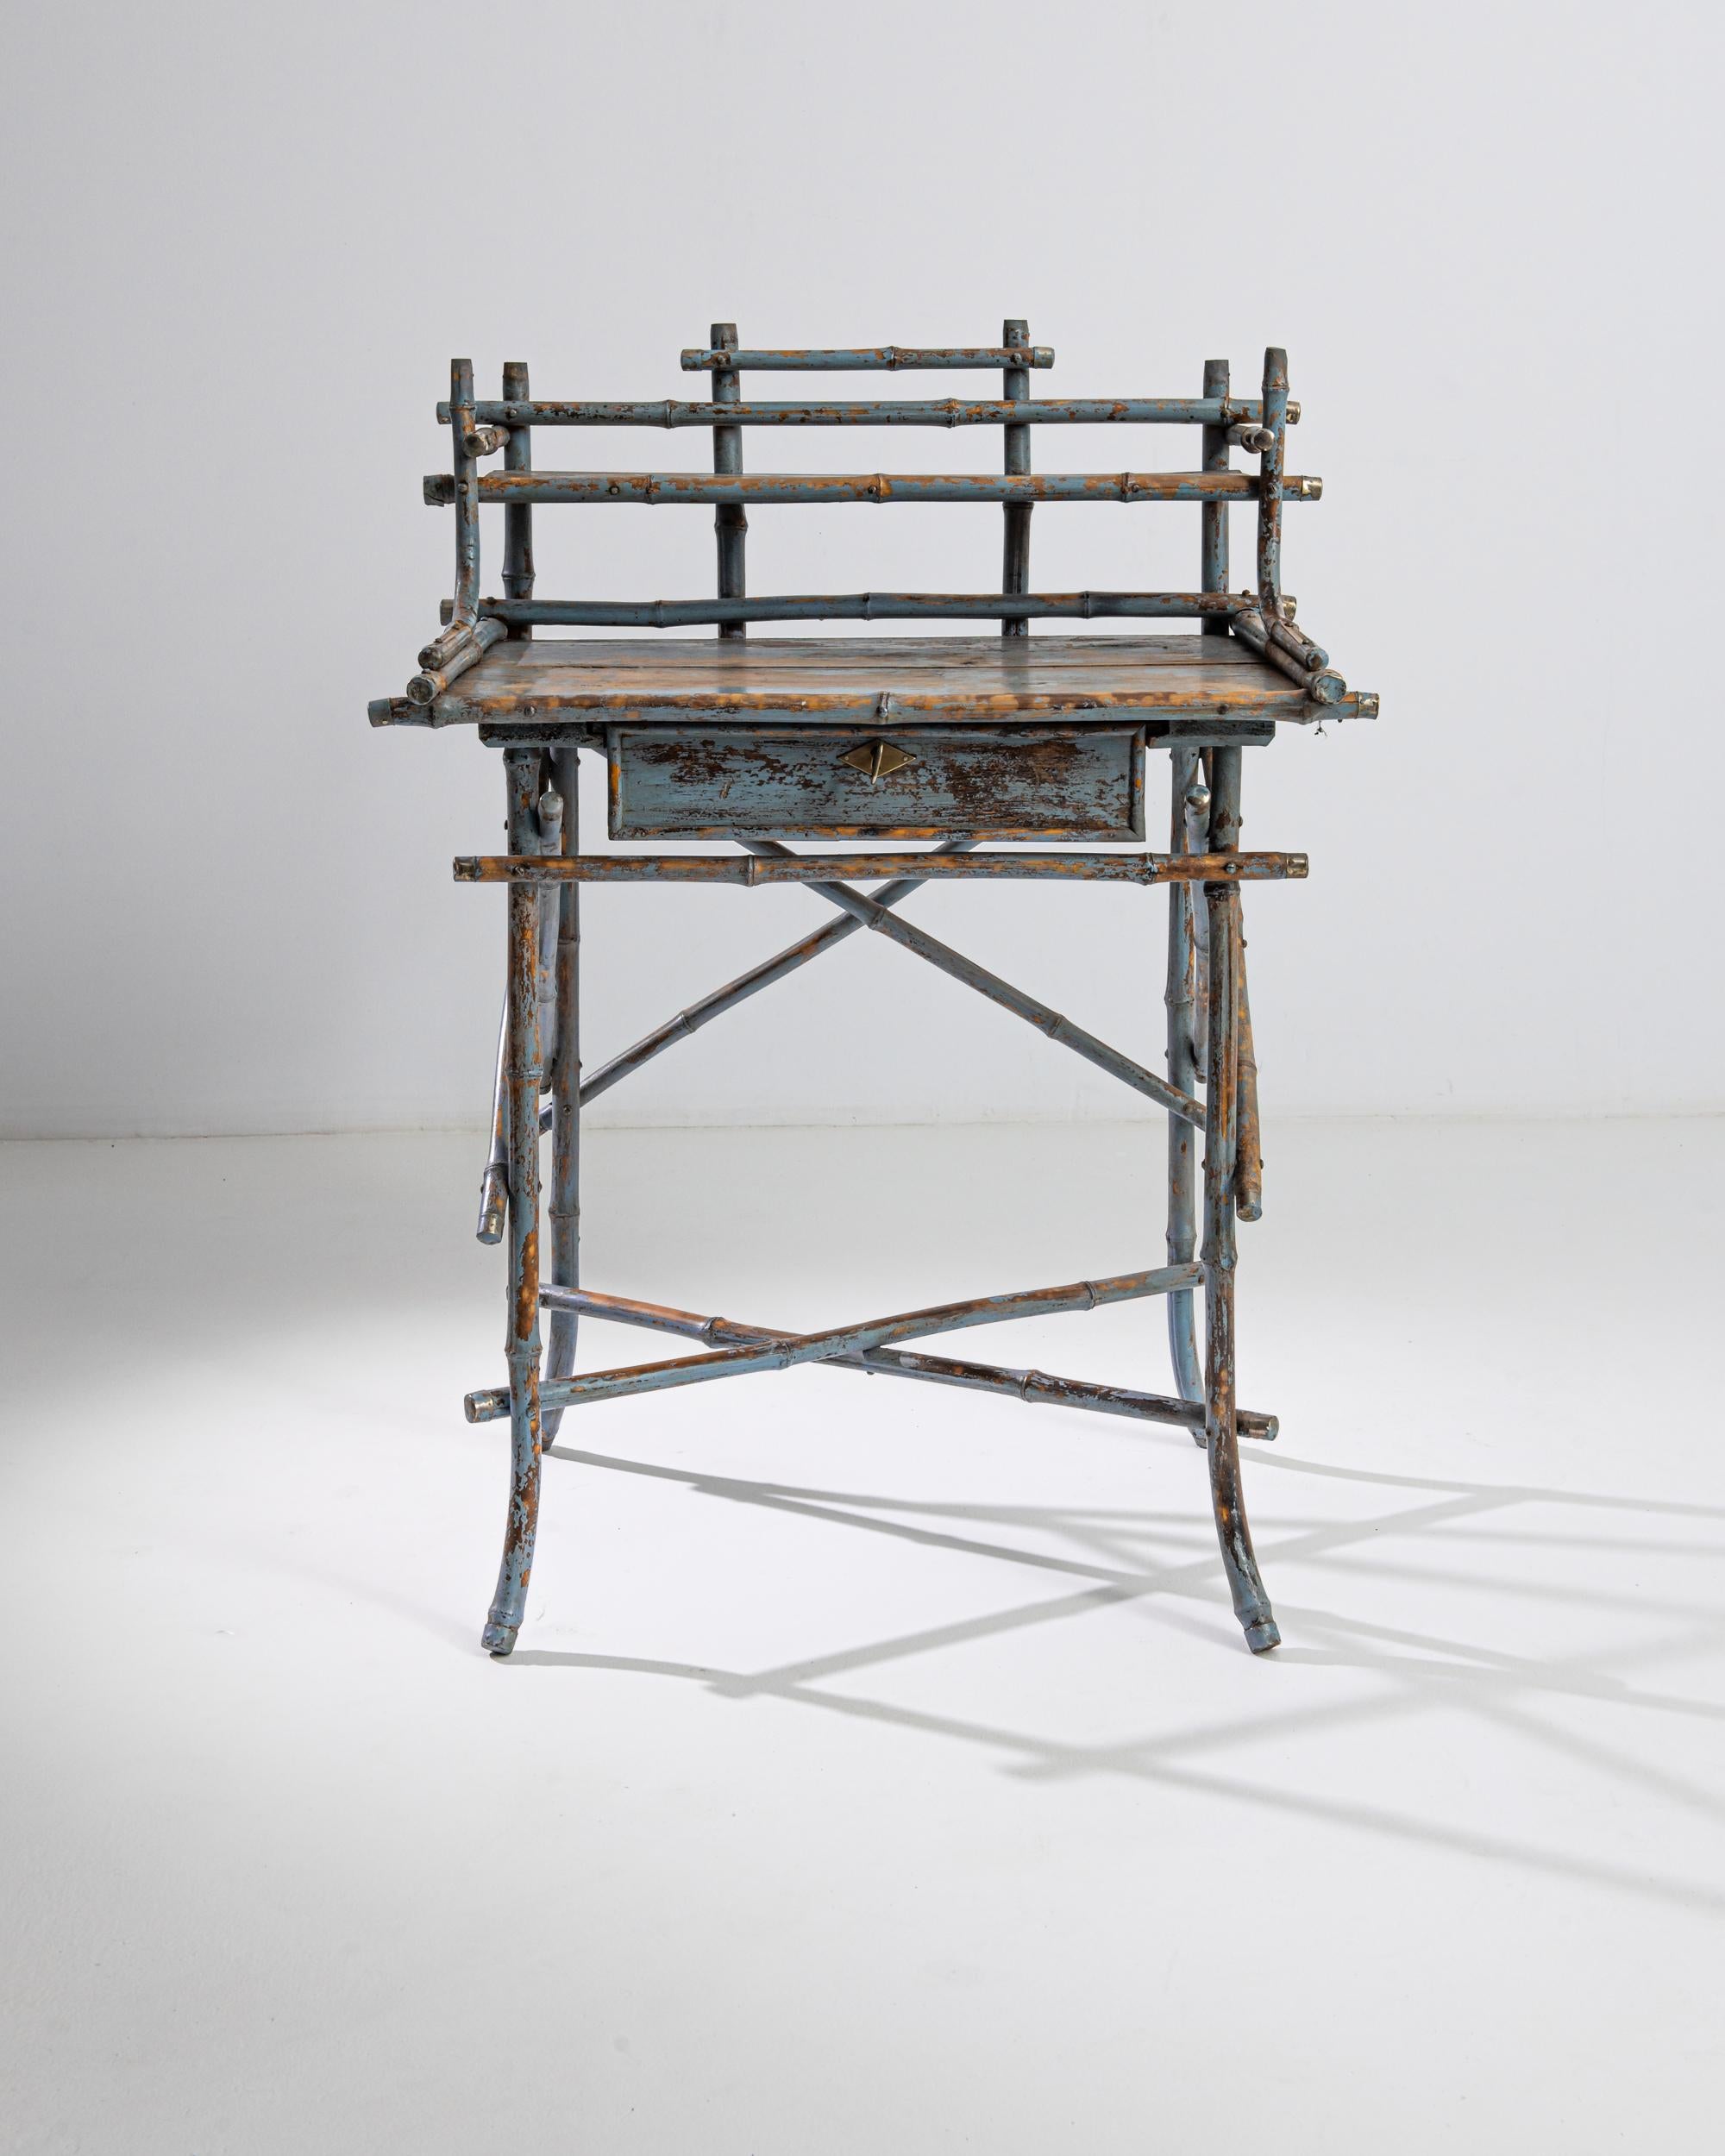 This one of a kind antique desk was produced in France, circa 1900. A wooden desk with a bamboo frame, this aerial piece recalls a scaffolding structure, balanced in an audacious composition. The desk features a small front drawer adorned with a